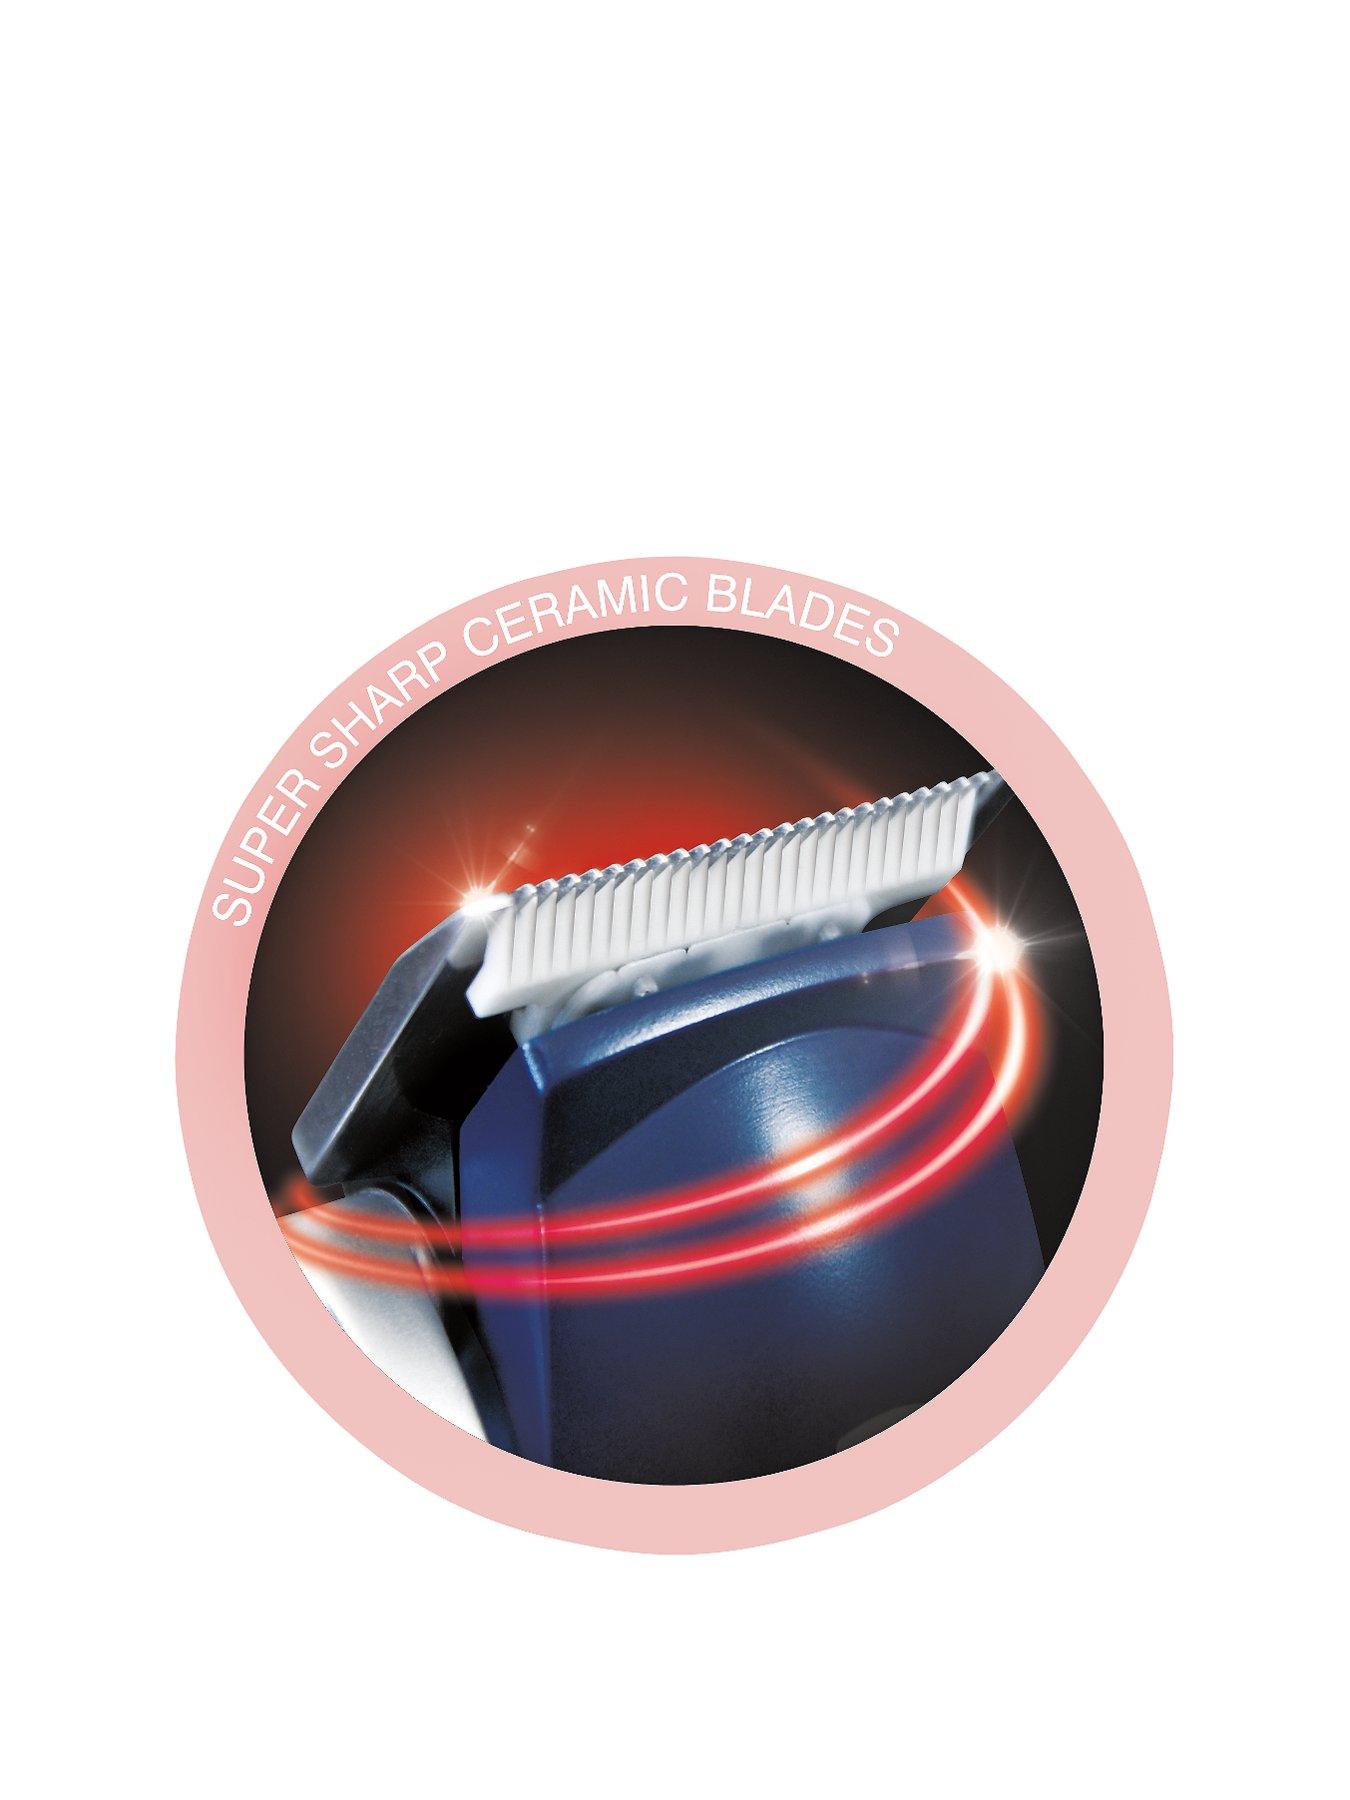 babyliss hair clippers 7474u